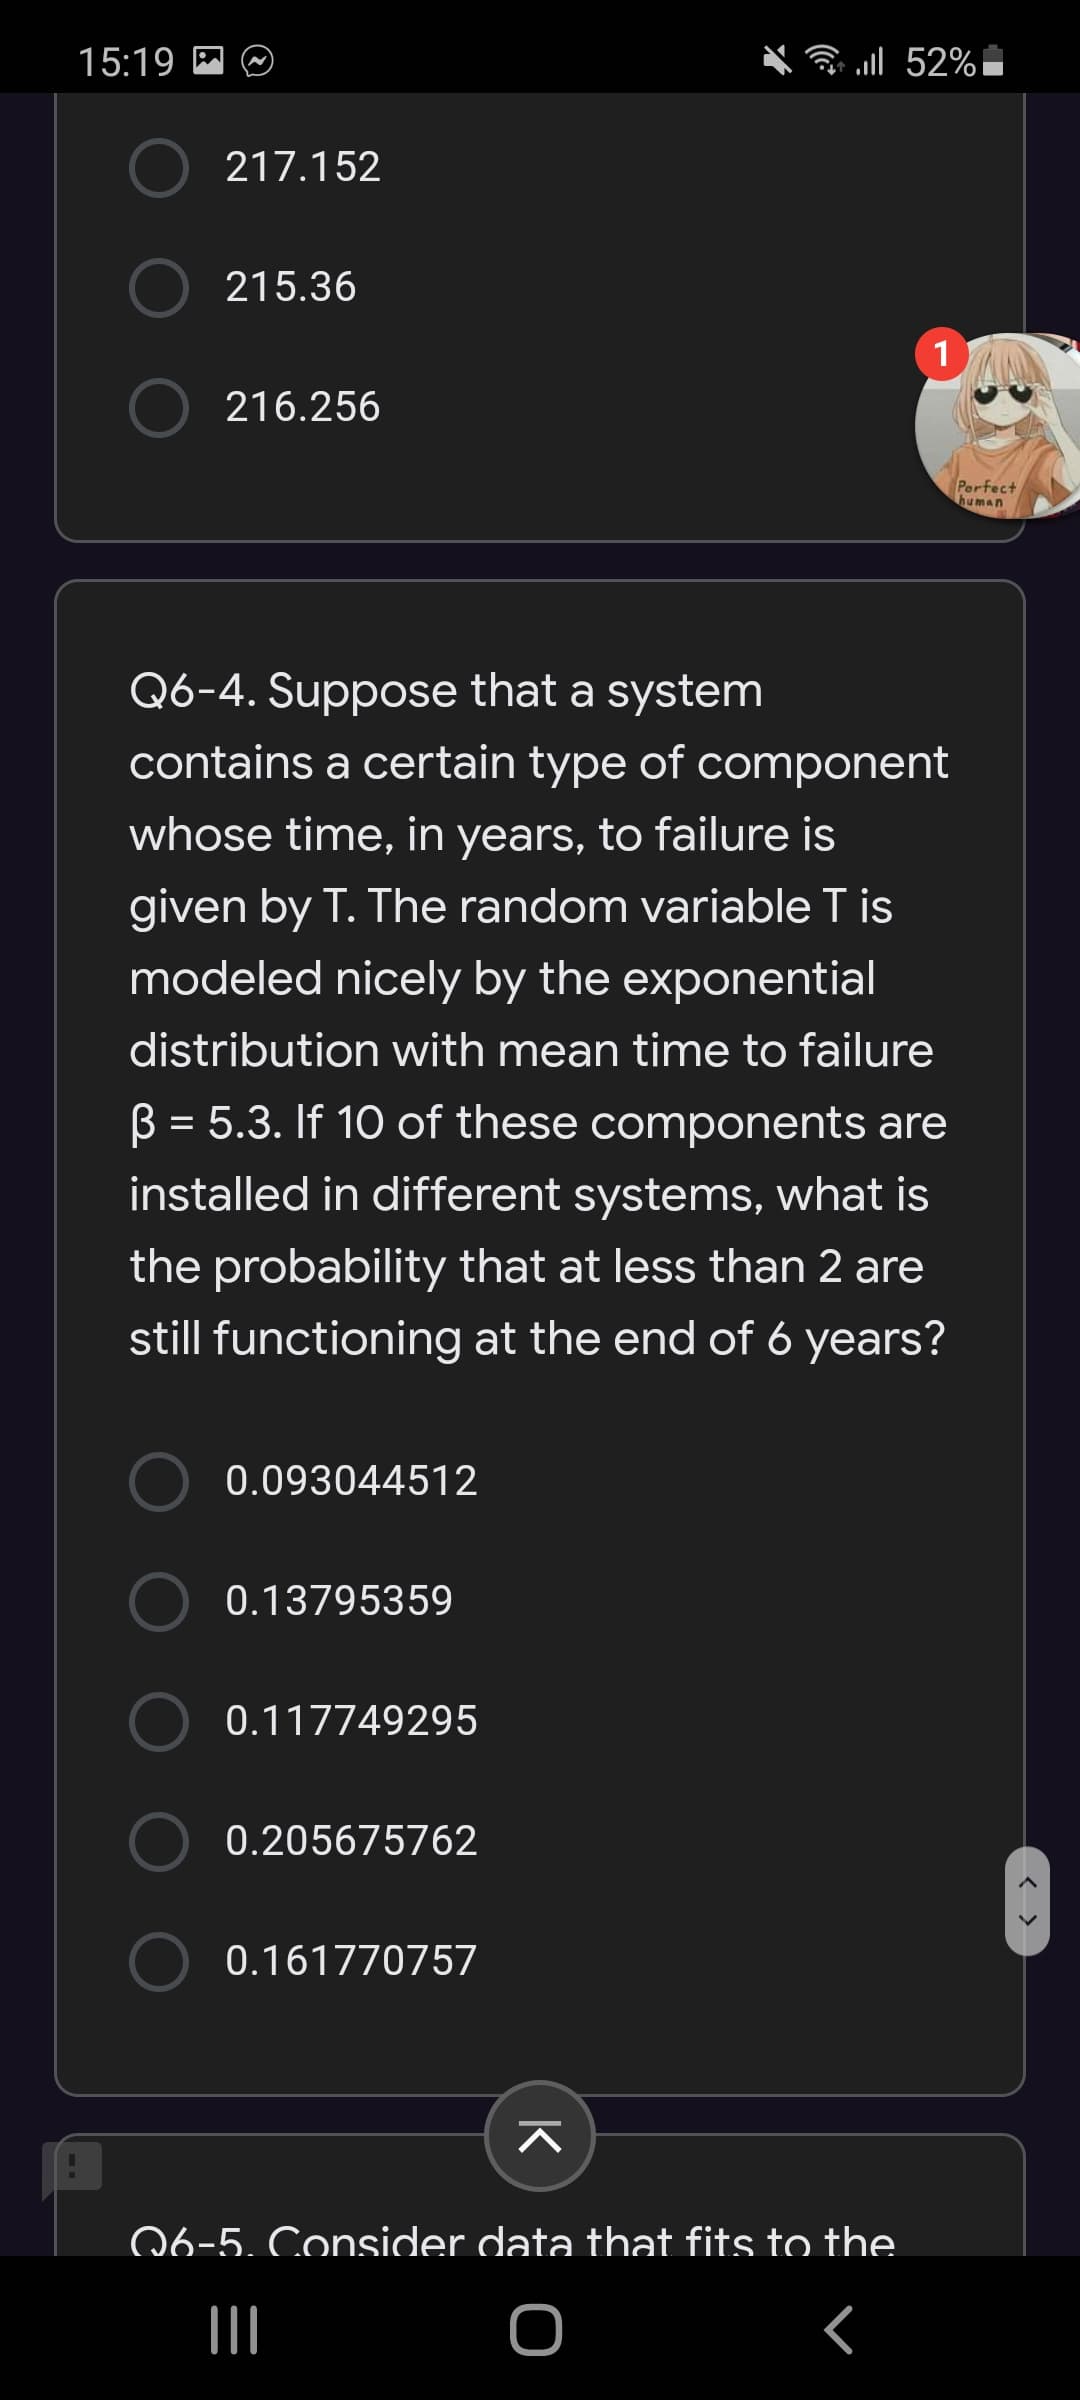 Q6-4. Suppose that a system
contains a certain type of component
whose time, in years, to failure is
given by T. The random variable T is
modeled nicely by the exponential
distribution with mean time to failure
B = 5.3. If 10 of these components are
%3D
installed in different systems, what is
the probability that at less than 2 are
still functioning at the end of 6 years?
0.093044512
0.13795359
0.117749295
0.205675762
0.161770757
